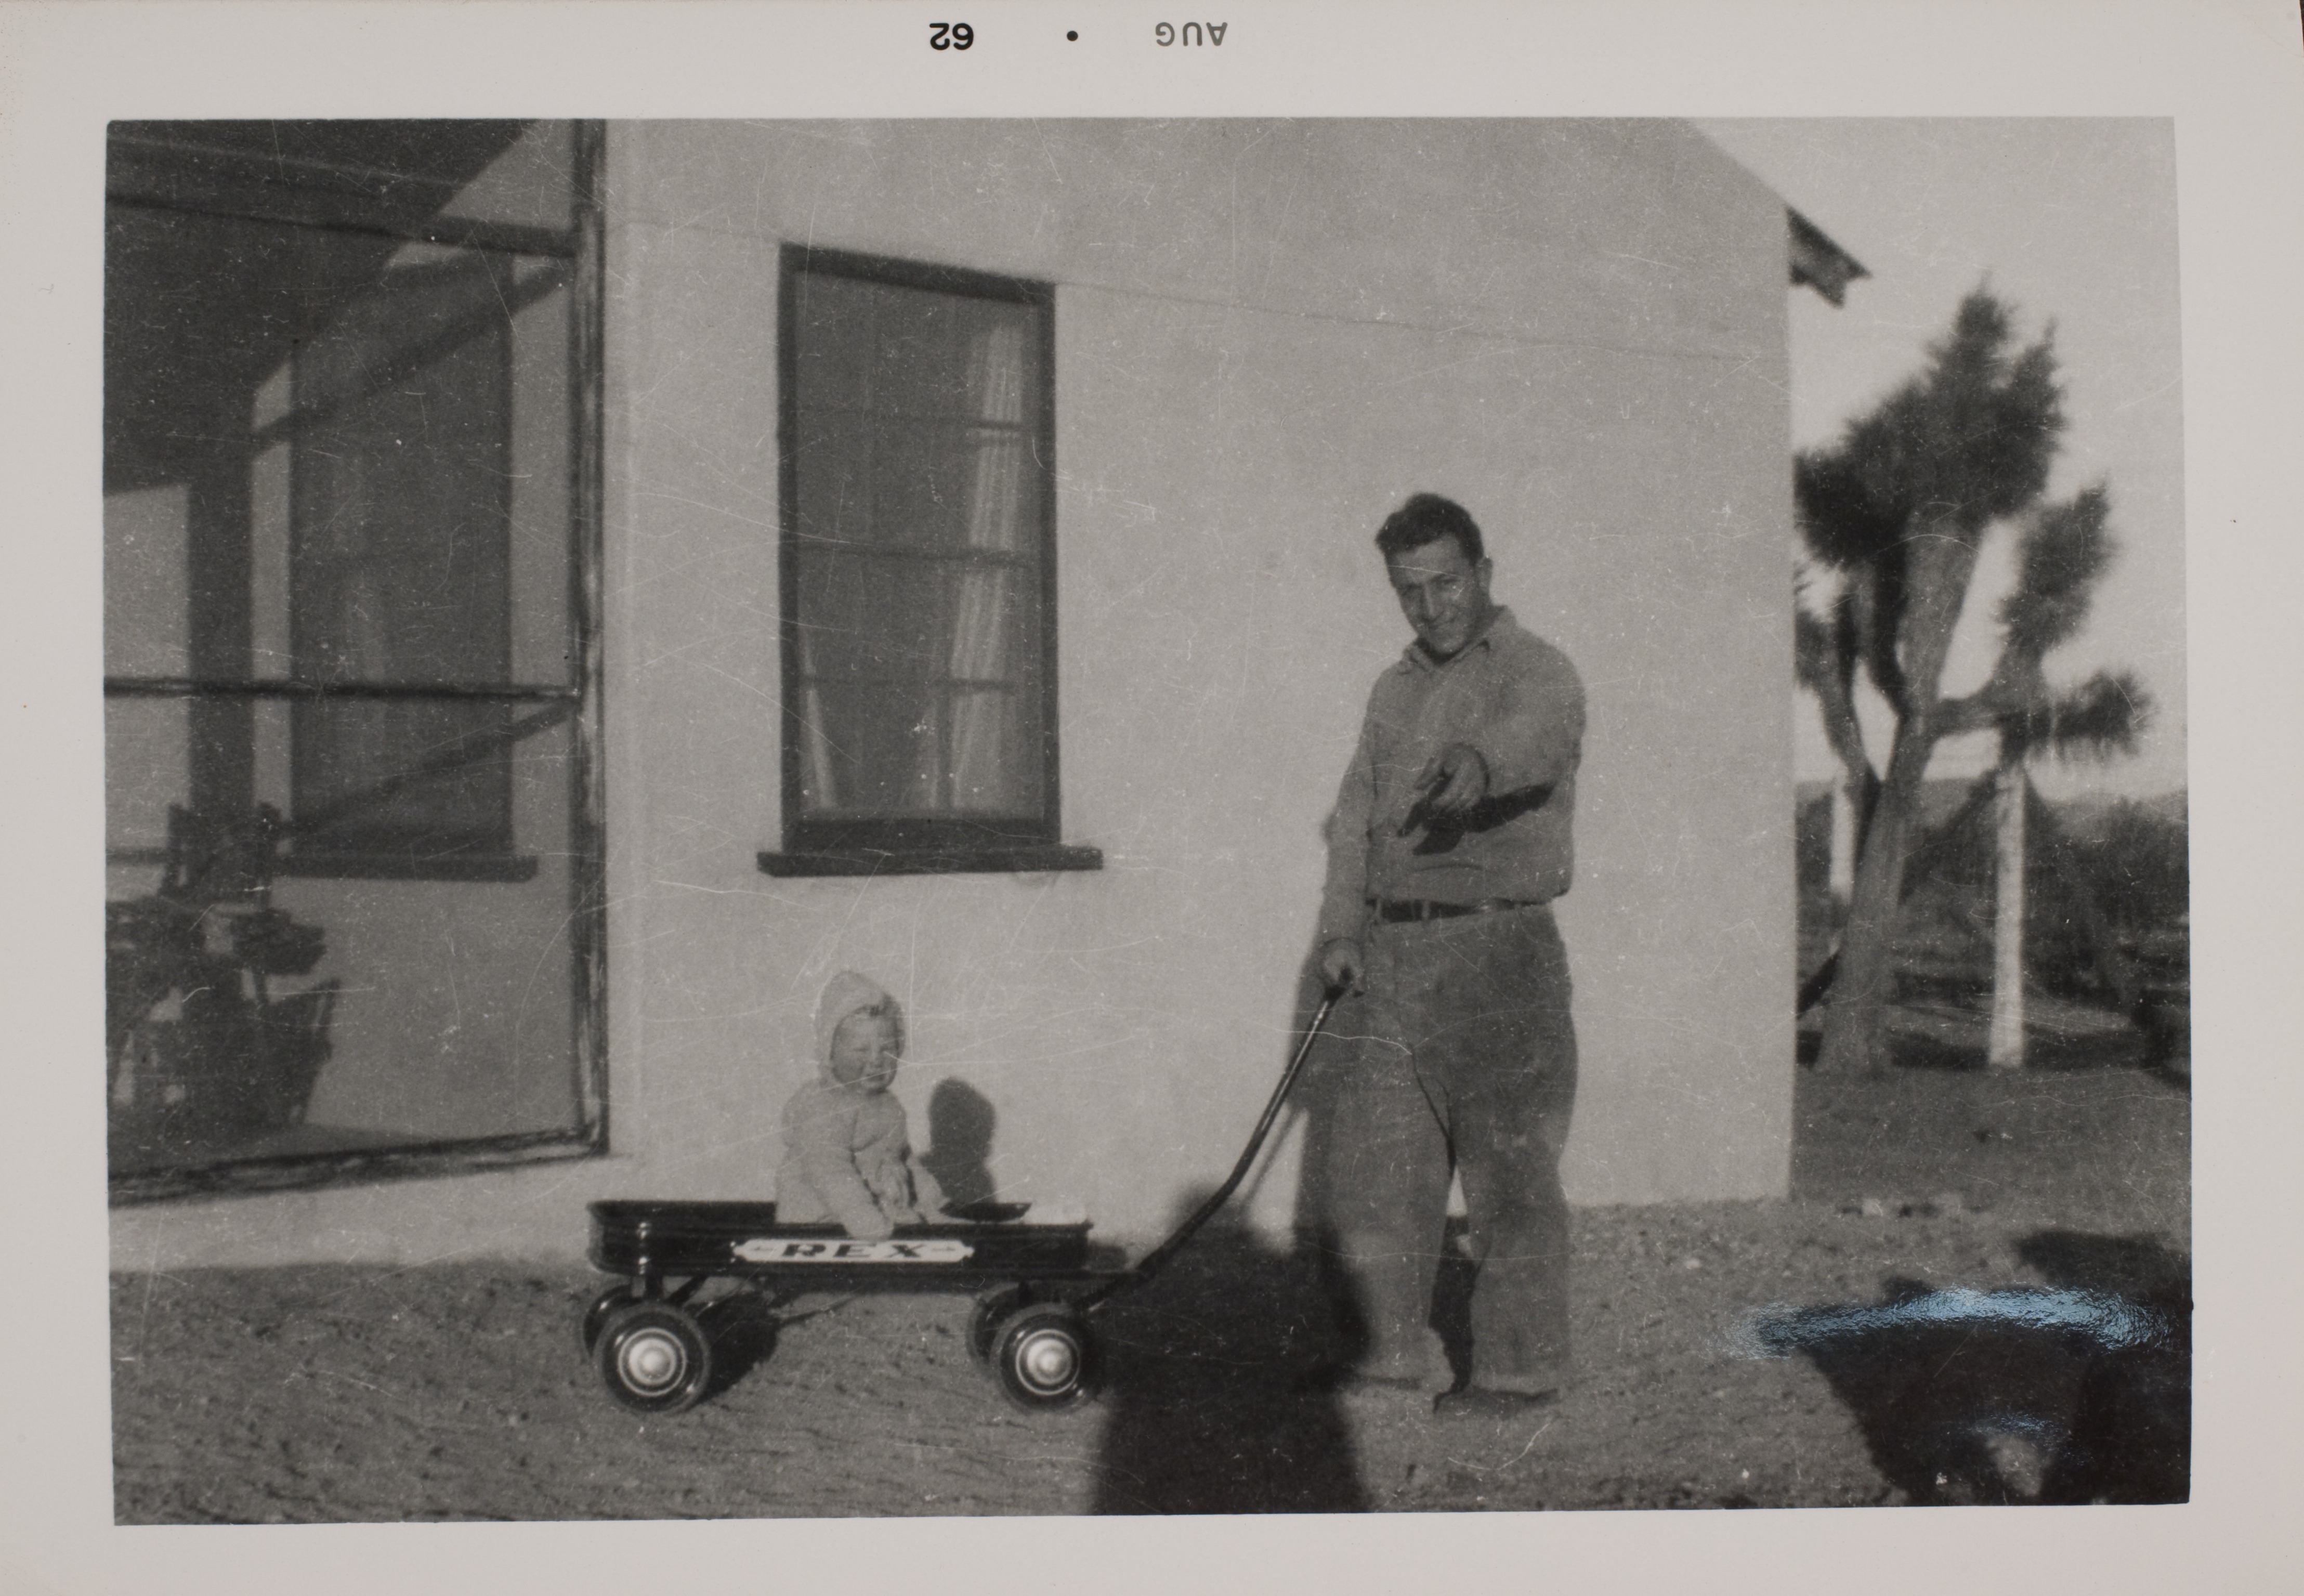 Rex Anthony Bell, Jr (Toni Larbow Beldam) in wagon with unidentified man by bunkhouse at Walking Box Ranch, Nevada: photographic print